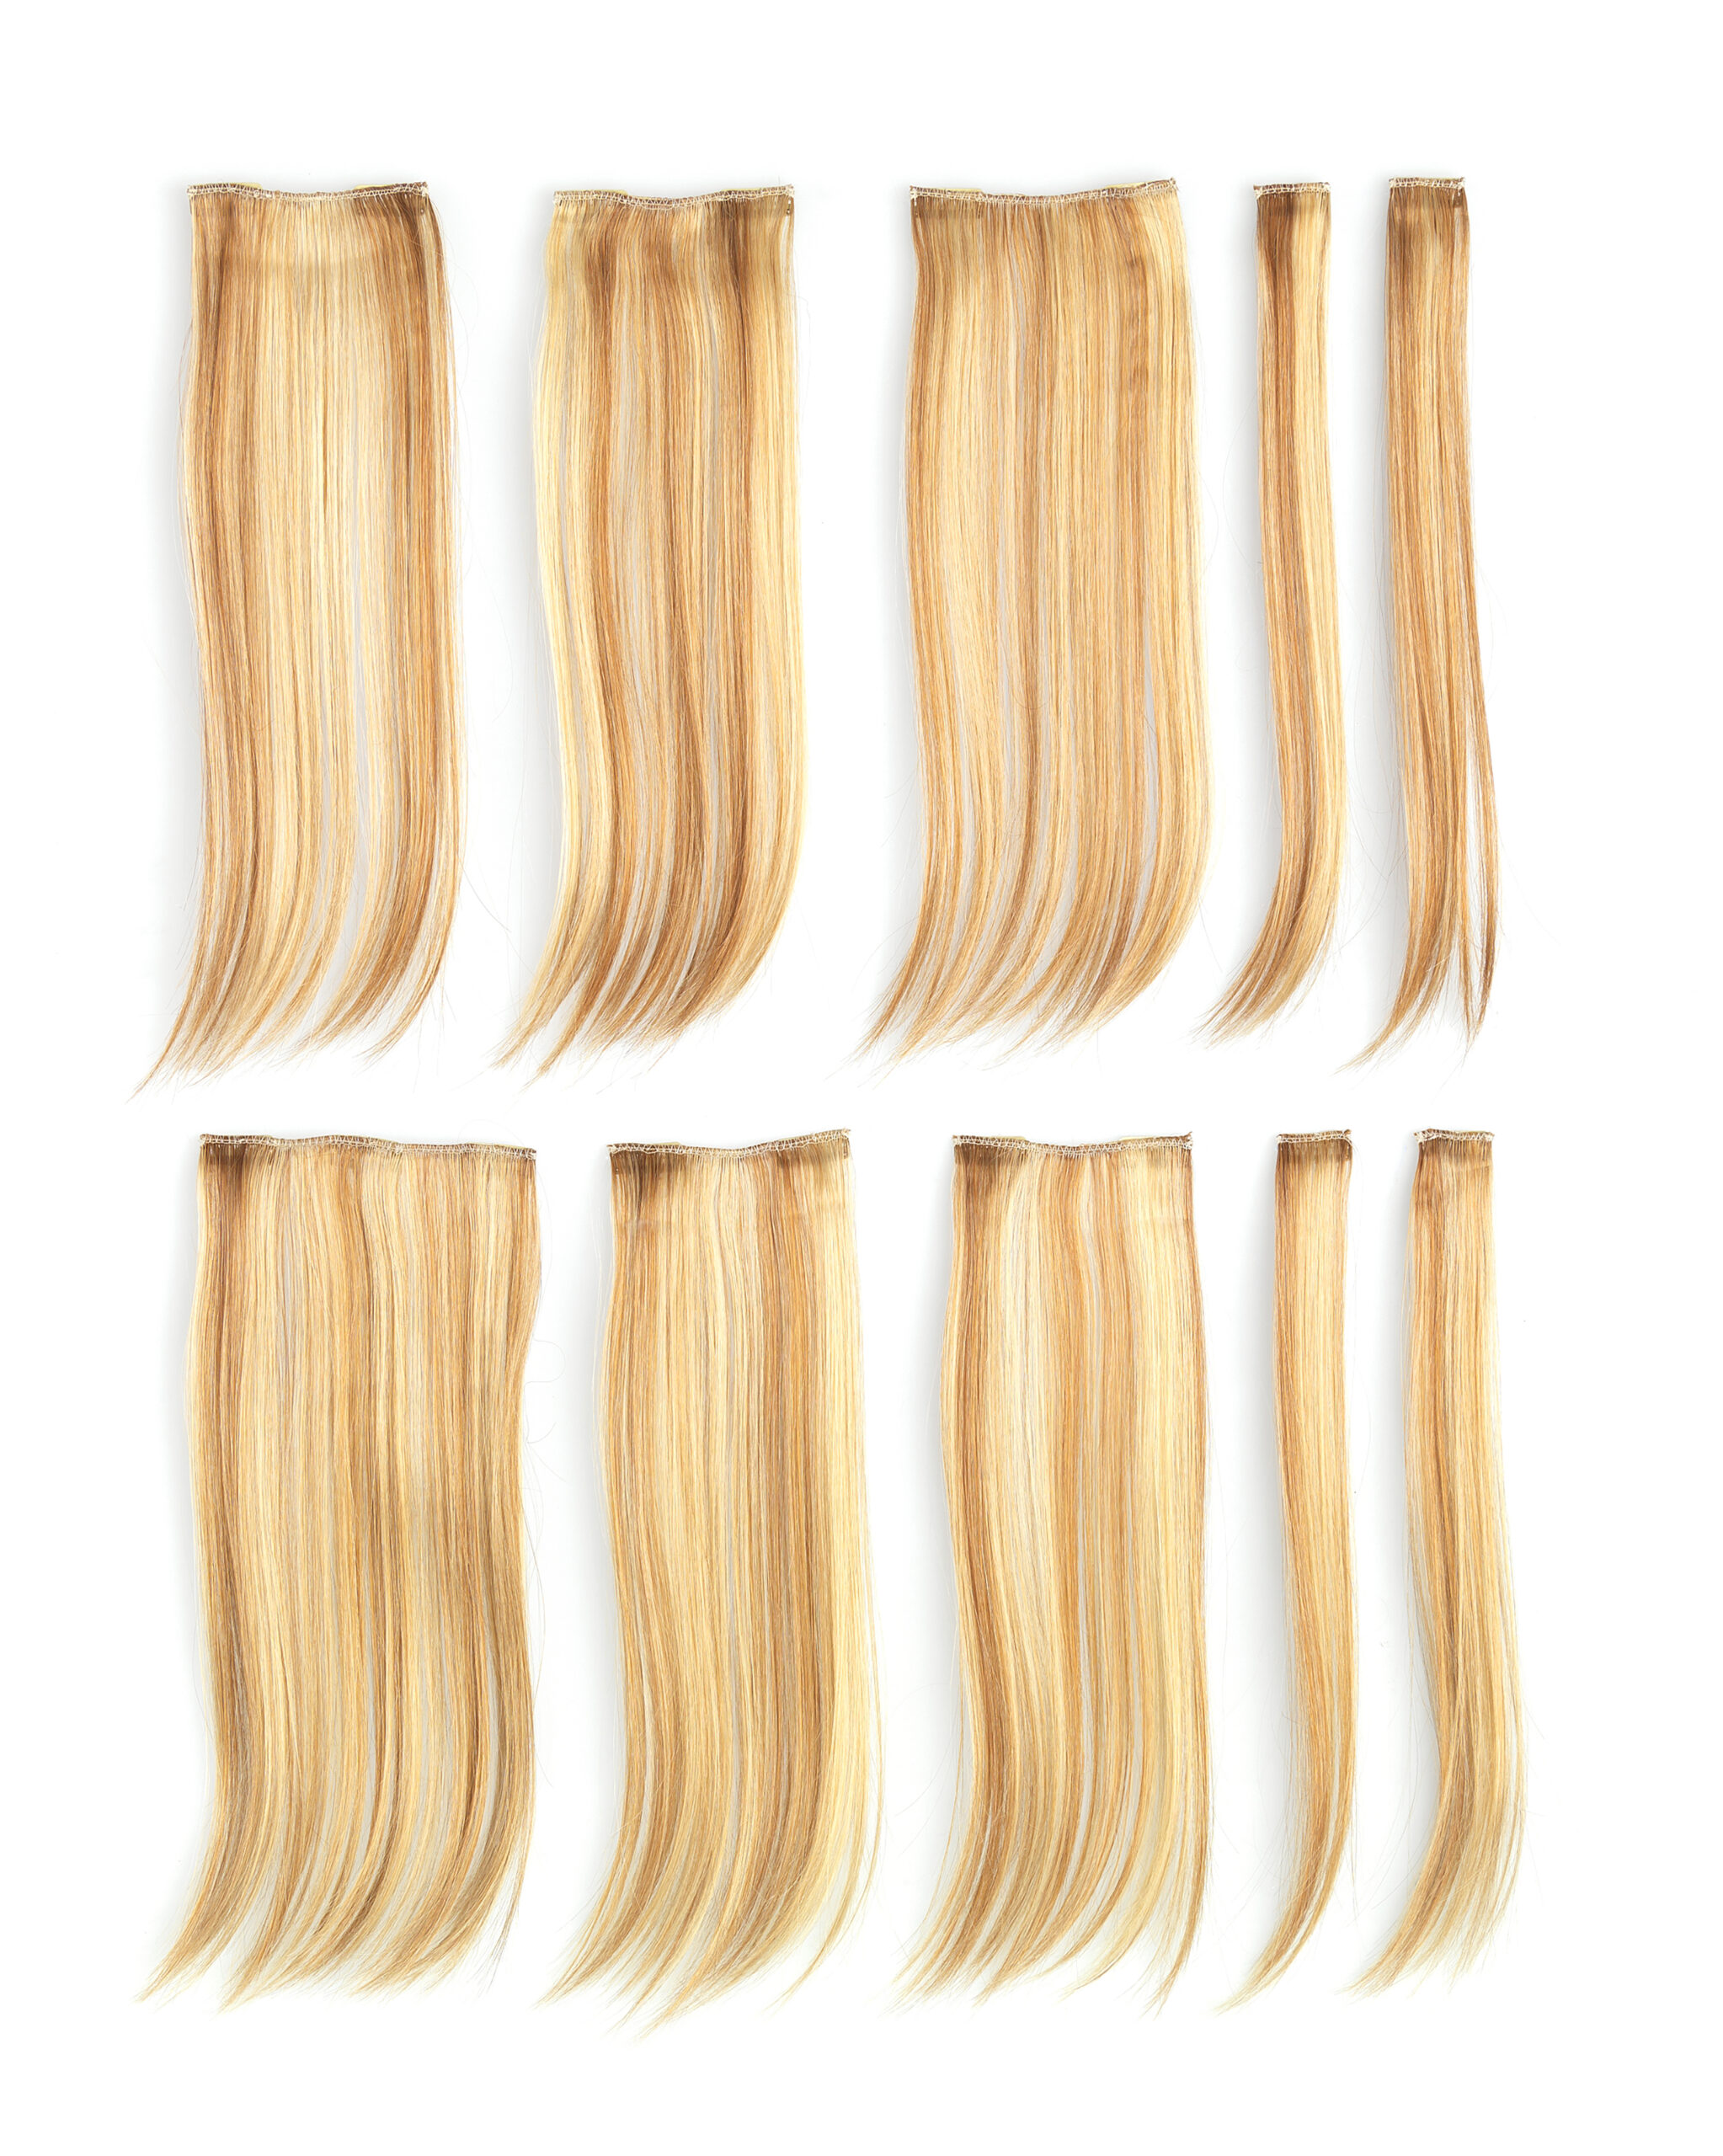 20″ 10-Piece Straight Human Hair Extension Kit Product